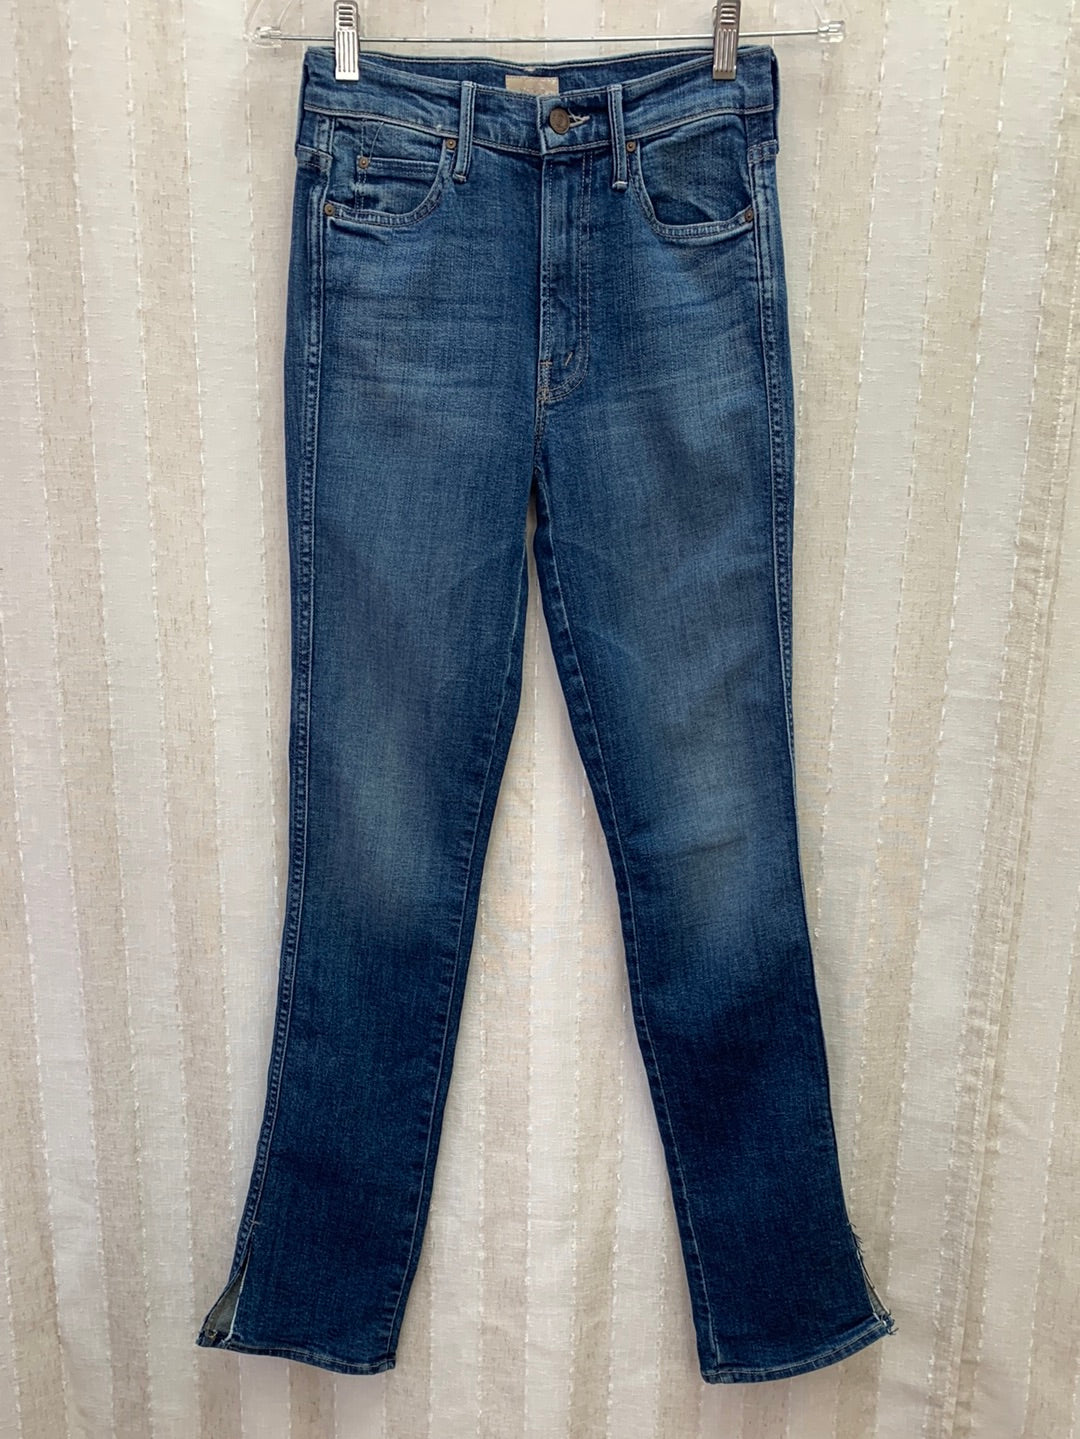 MOTHER right of passage The High Waisted Rascal Slice Undine Hem Jeans - 24